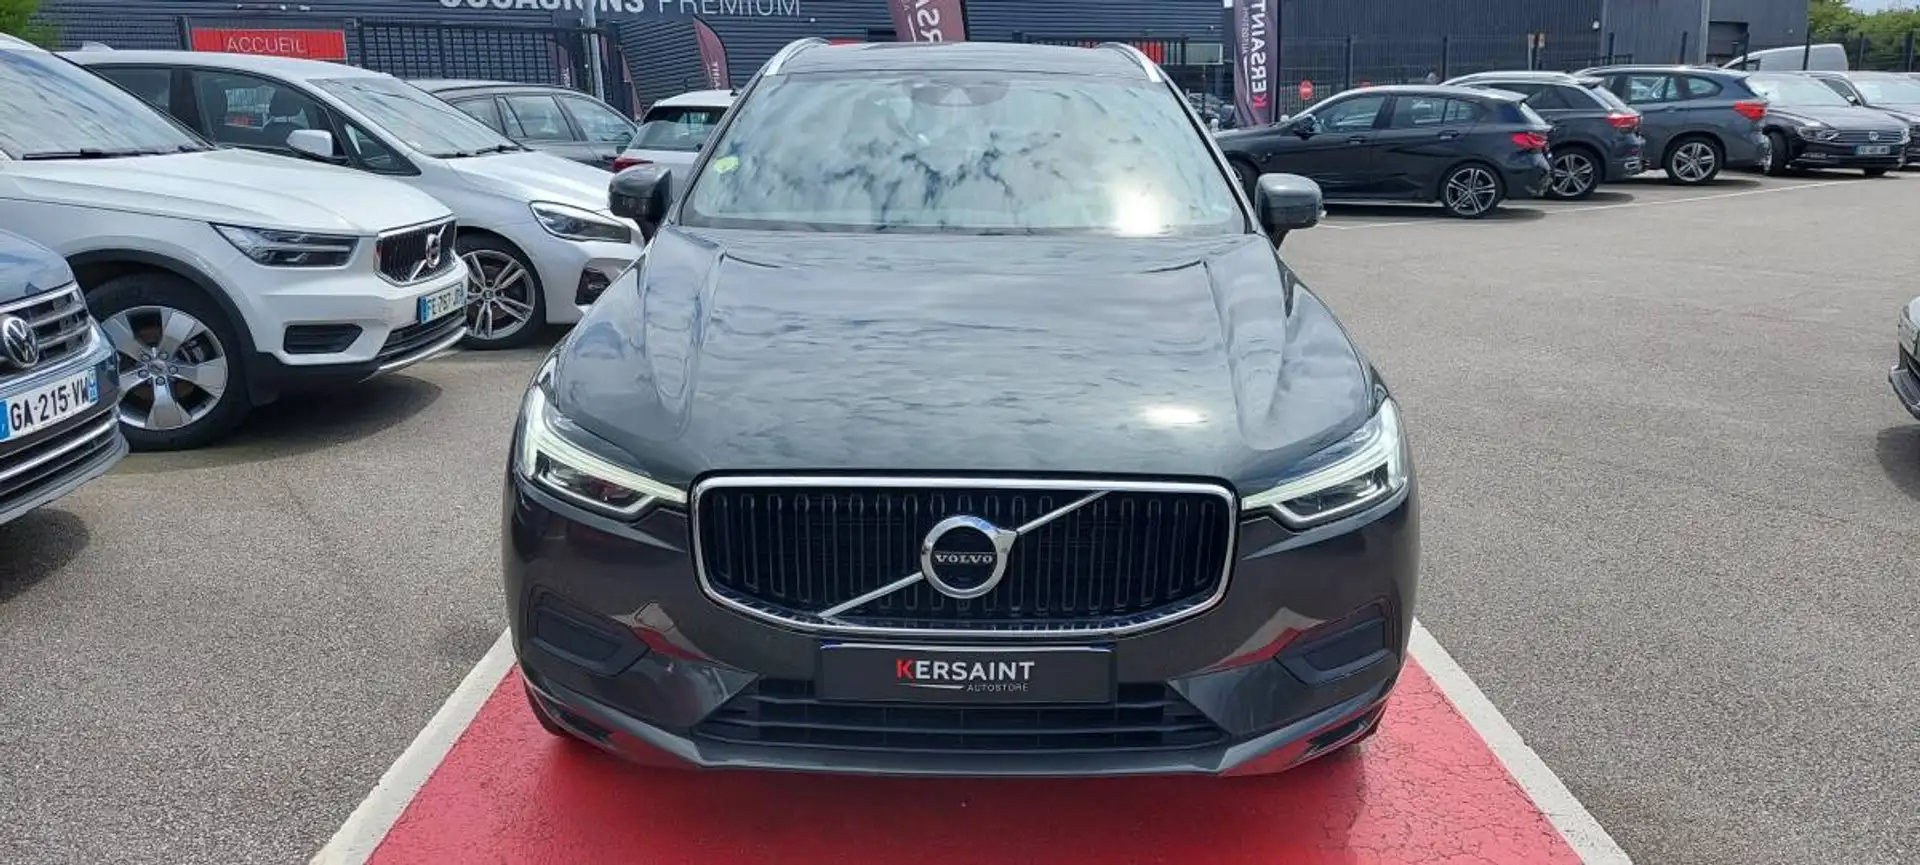 Volvo XC60 D4 ADBLUE 190 CH GEARTRONIC 8 BUSINESS EXECUTIVE - 2